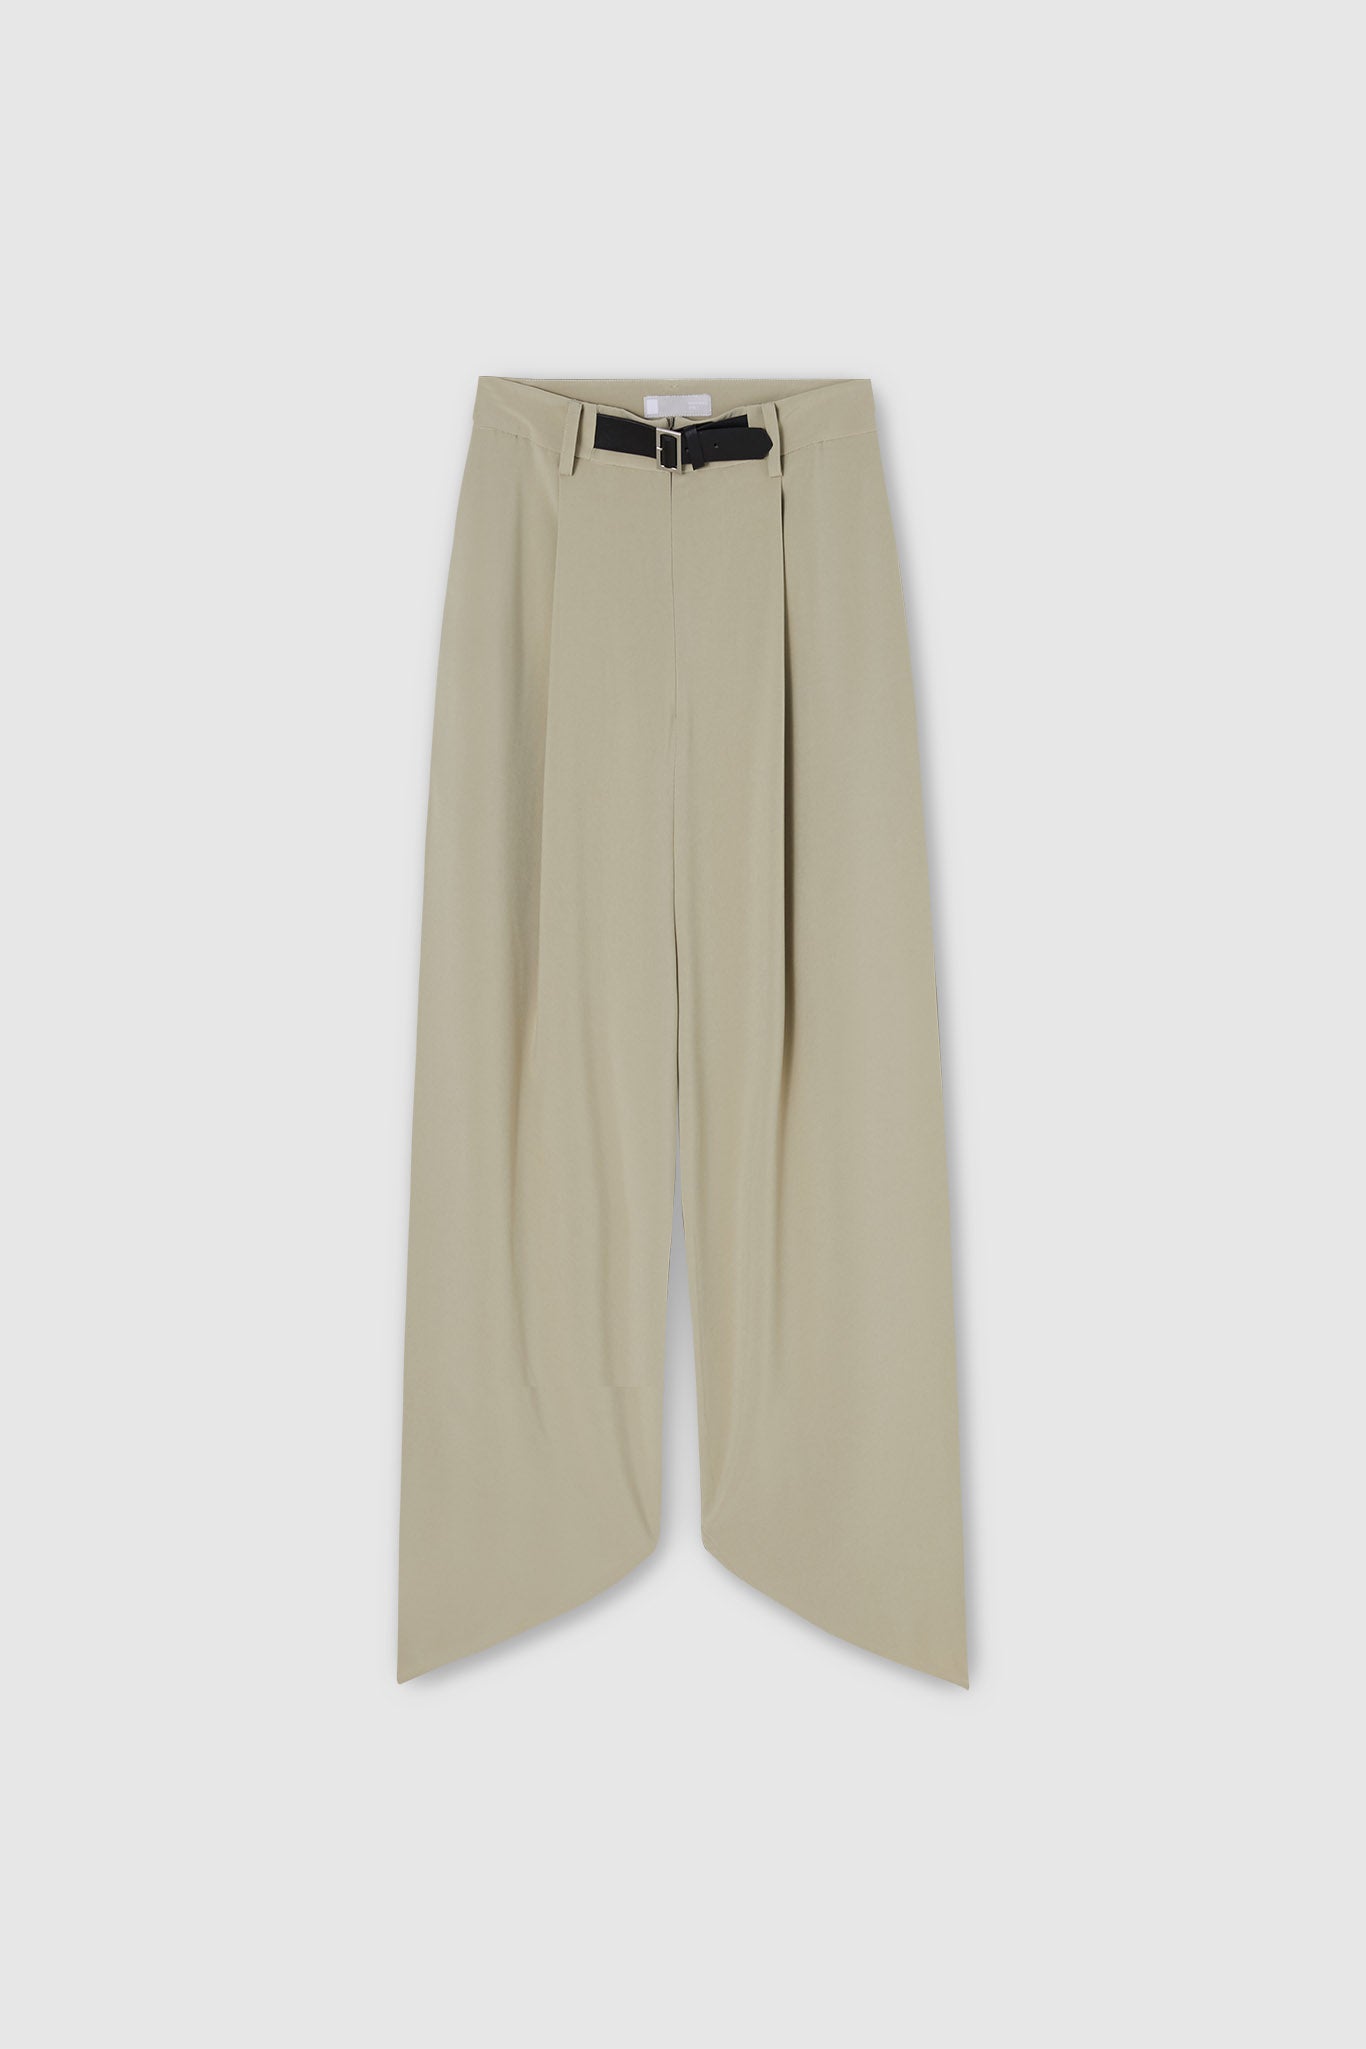 round cut straight ankle pants